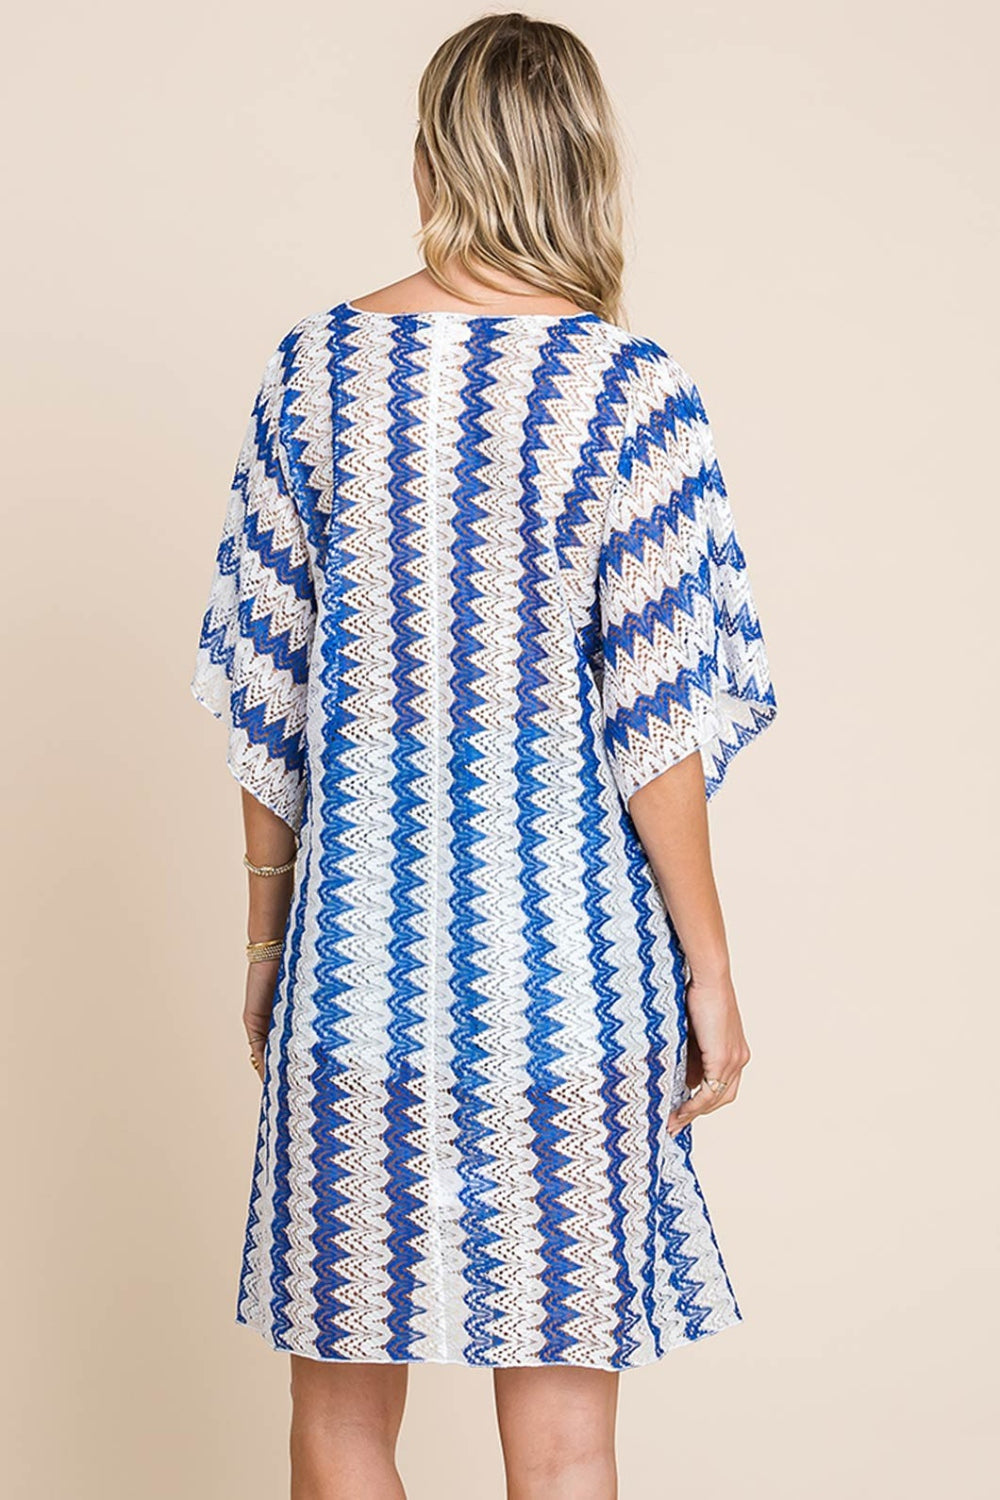 Front Tie Blue Striped Plunge Half Sleeve Swimwear Cover-Up Southern Soul Collectives